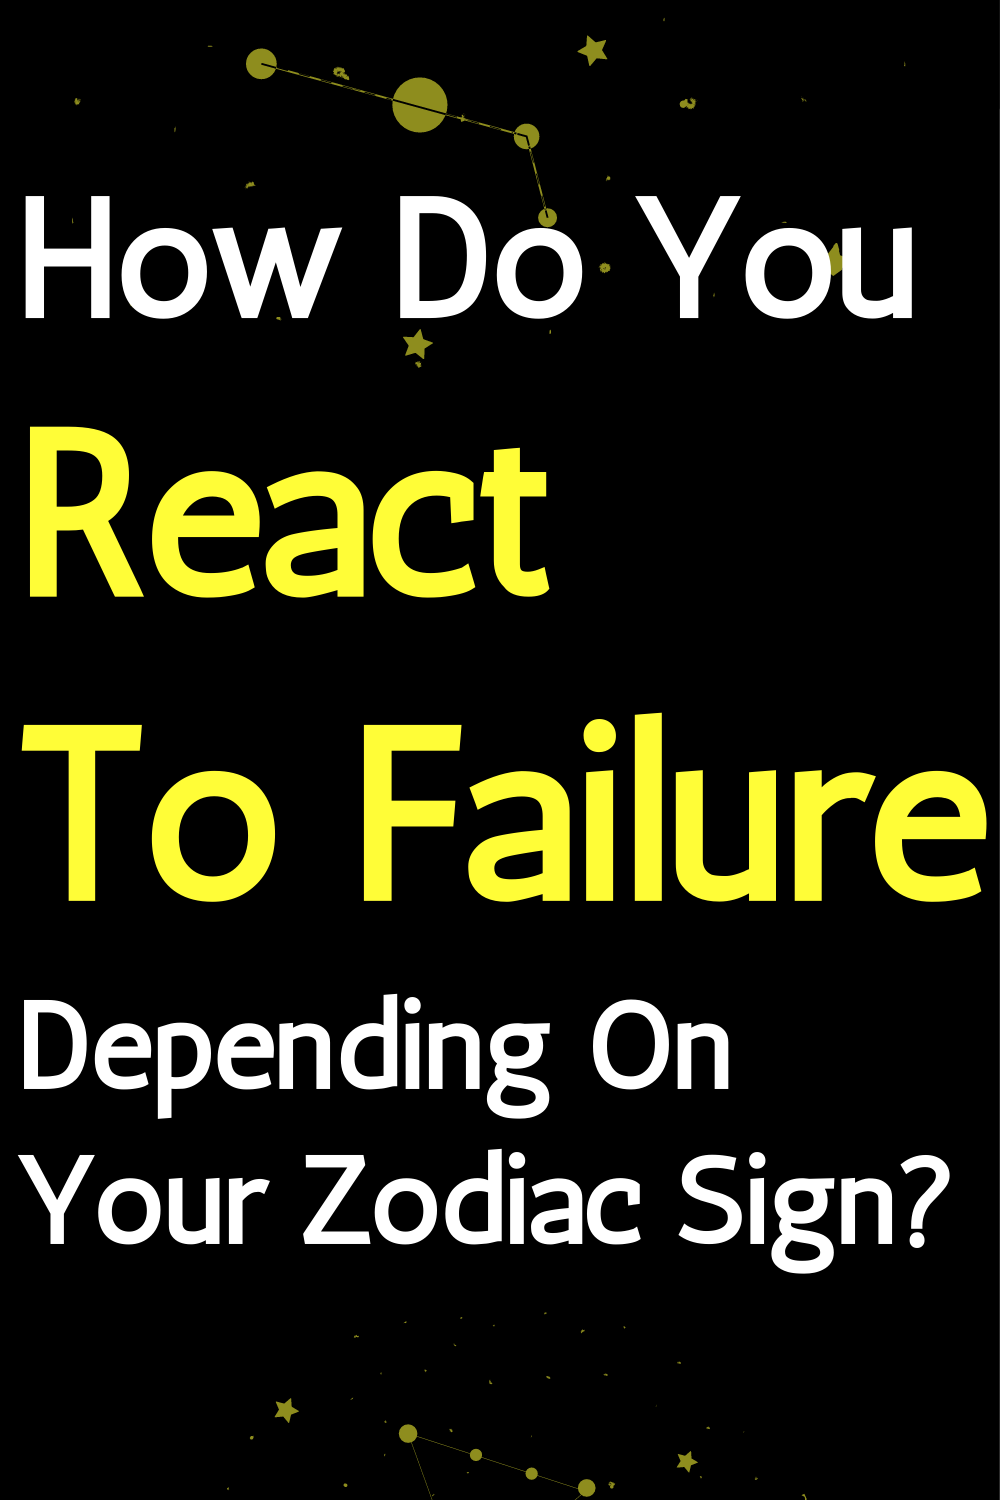 How Do You React To Failure Depending On Your Zodiac Sign?